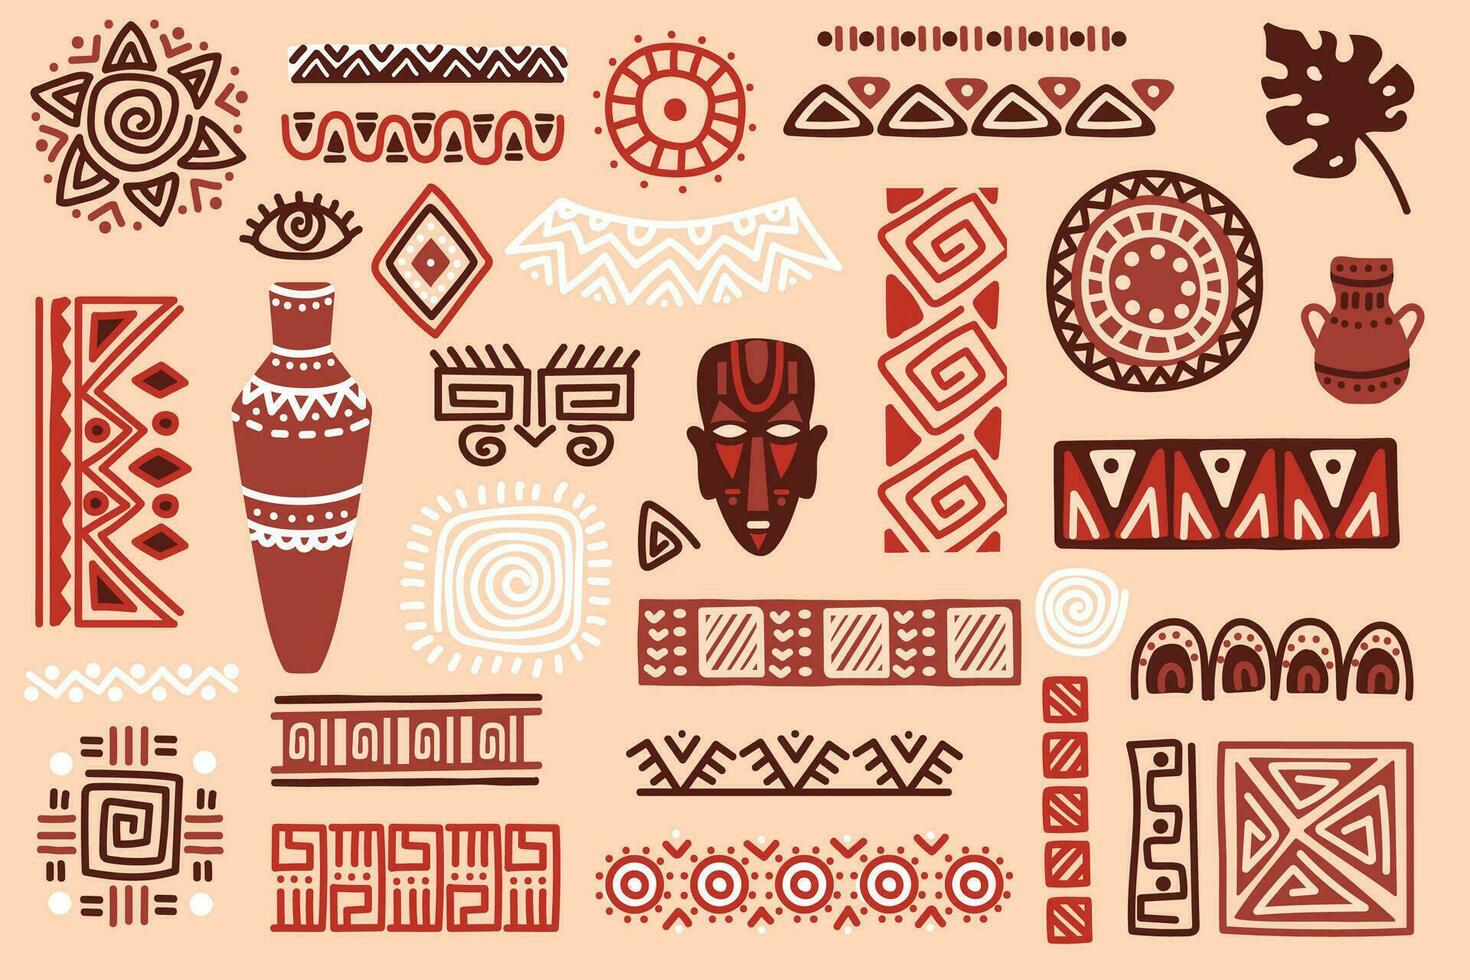 Hand drawn african elements, tribal shapes and textile ornaments. Traditional ritual masks, vases, ethnic circles and borders vector set